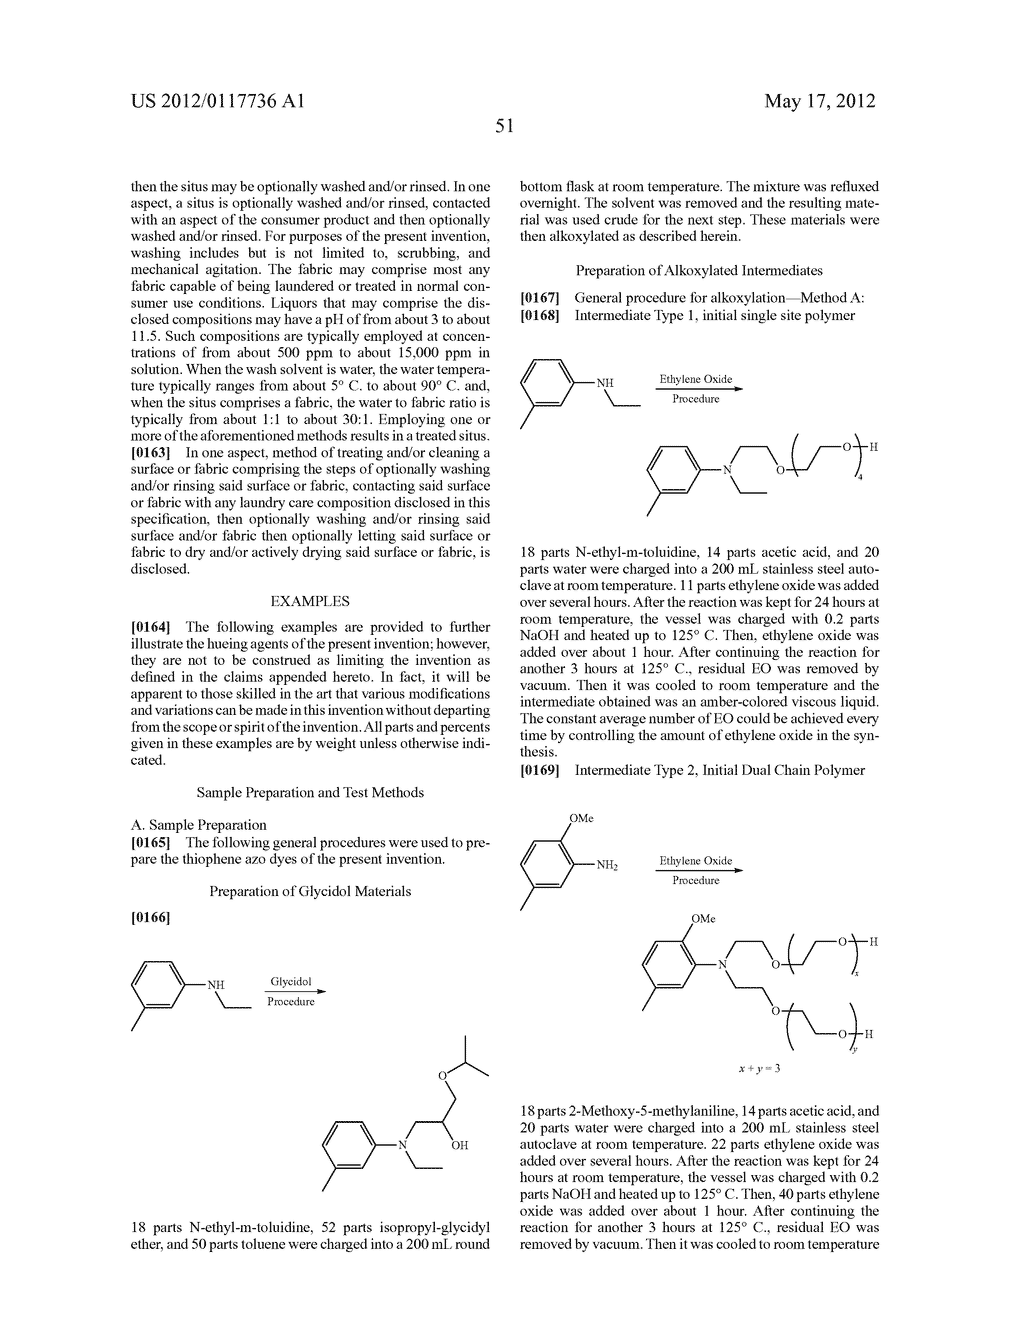 THIOPHENE AZO DYES AND LAUNDRY CARE COMPOSITIONS CONTAINING THE SAME - diagram, schematic, and image 52